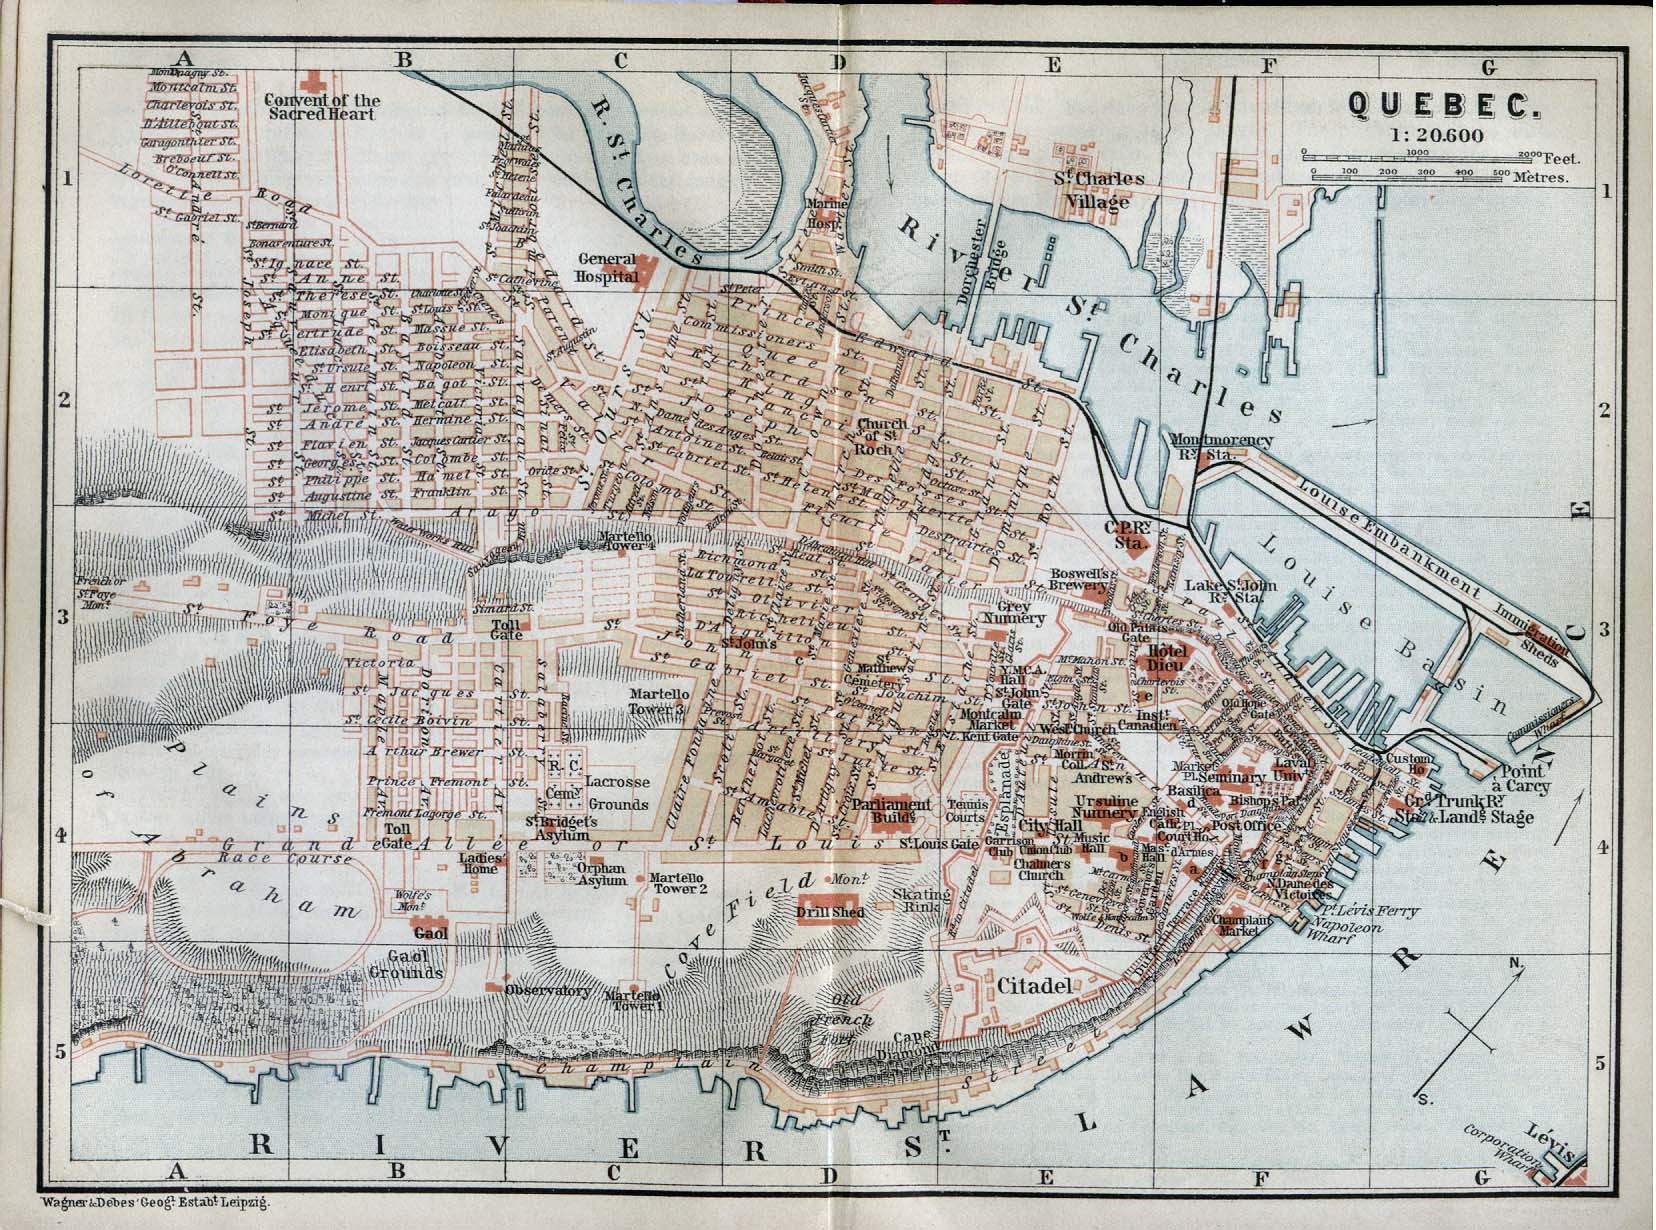 File:Quebec City Map 1894.Jpg - Wikimedia Commons